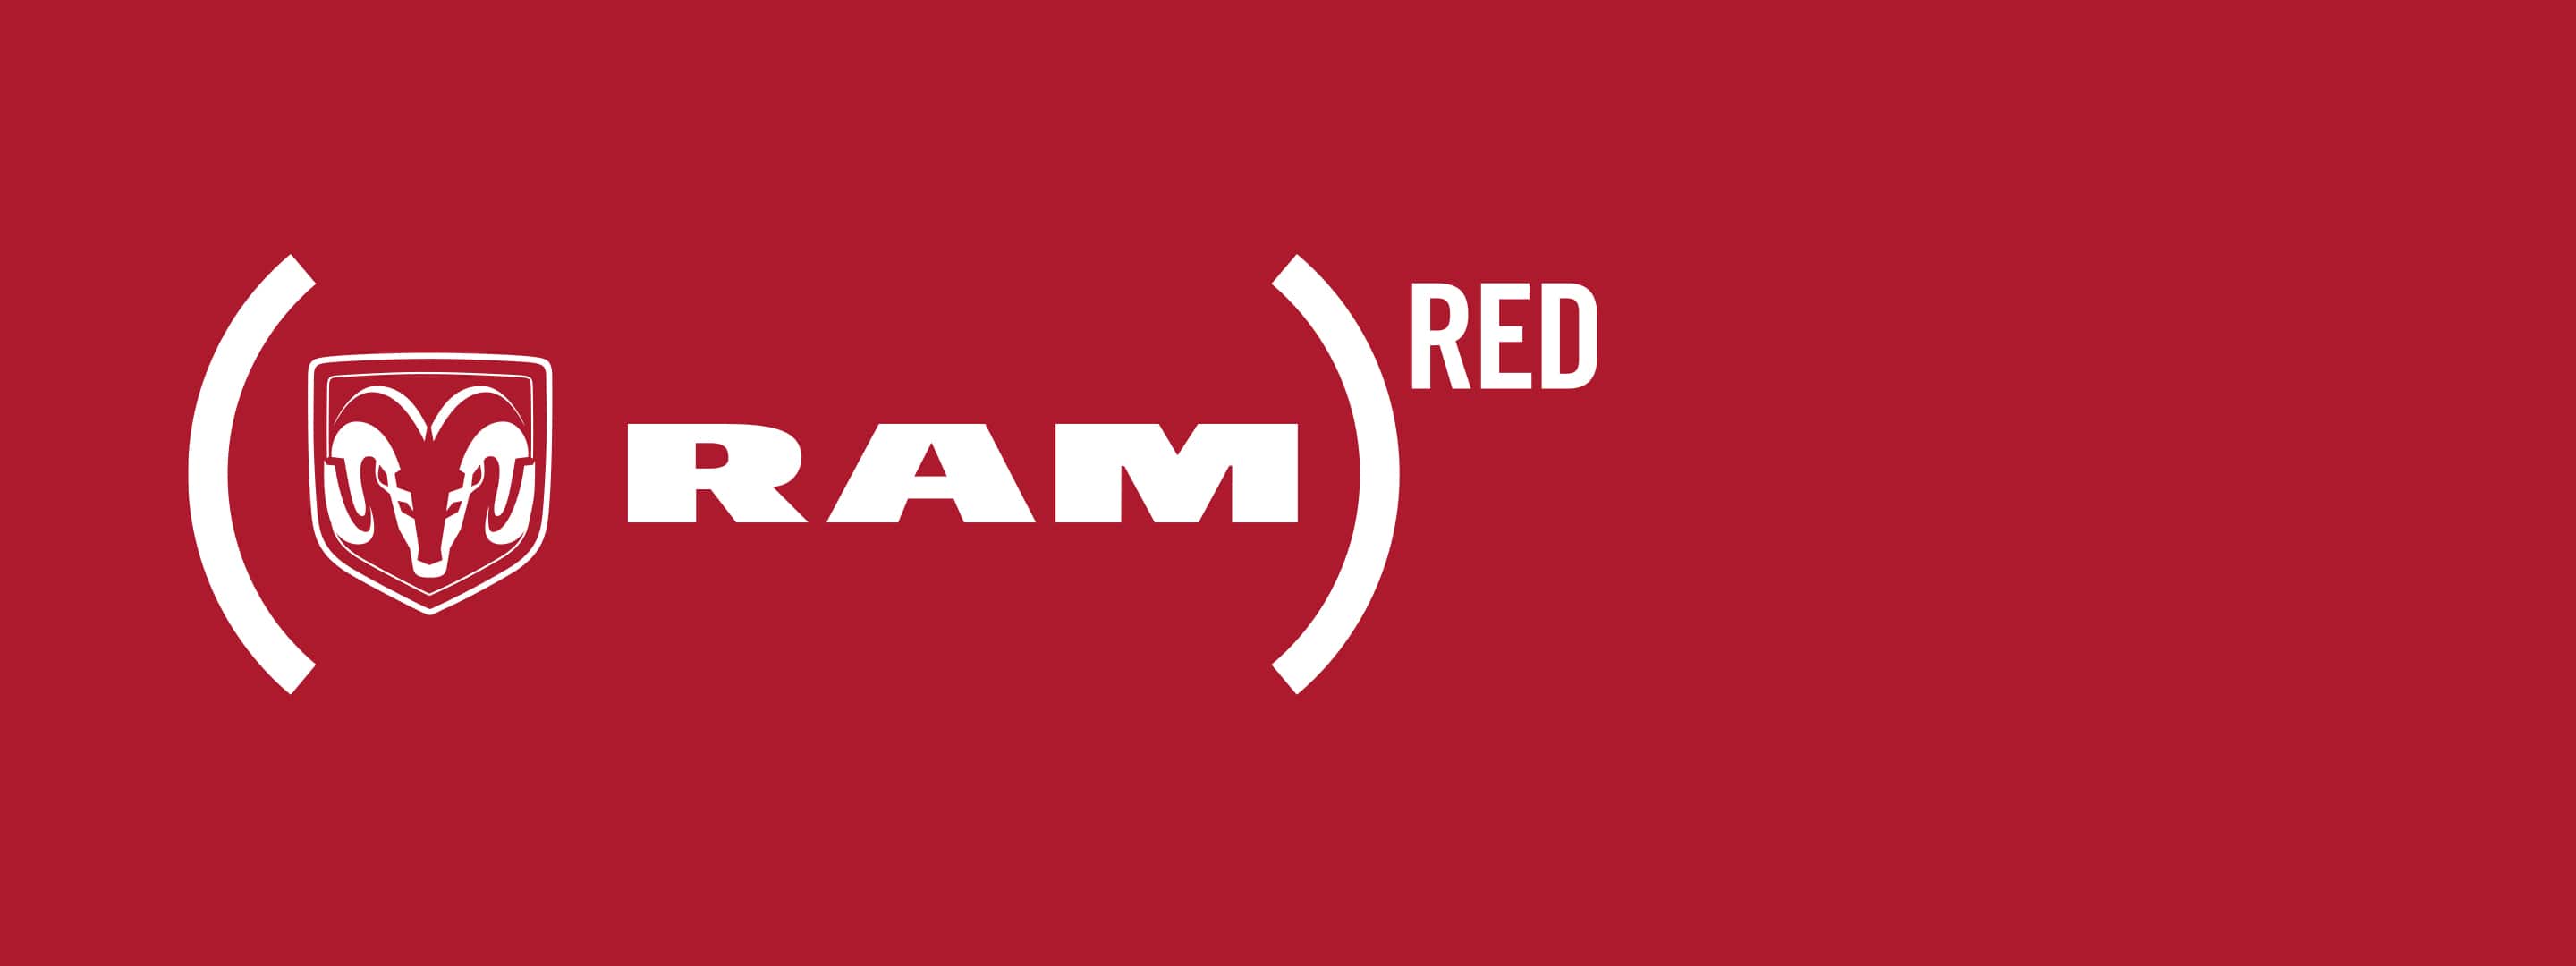 The Ram's head logo and Ram brand mark surrounded by the Product Red logo.